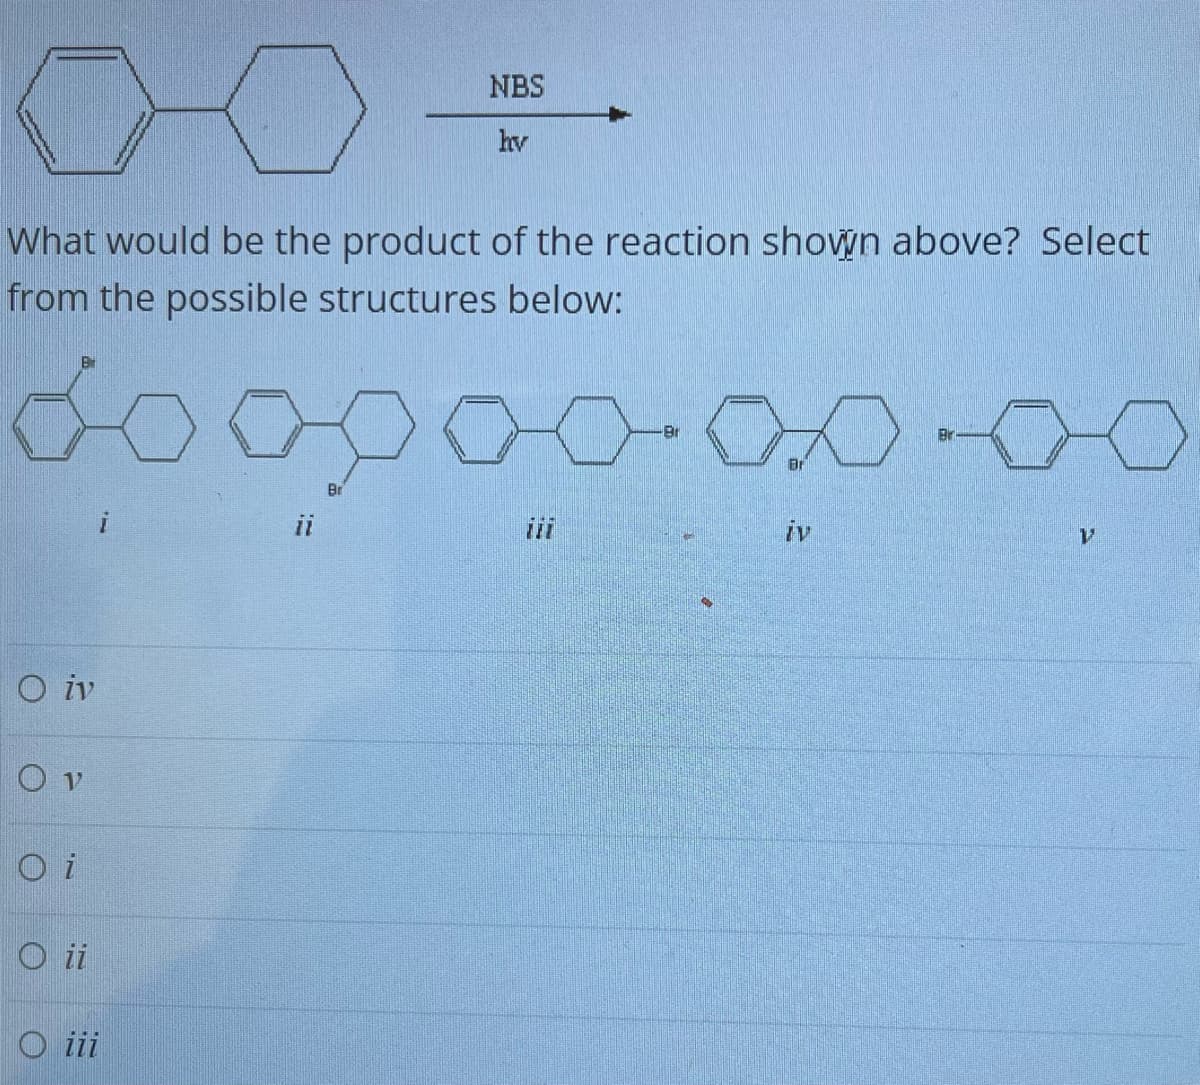 What would be the product of the reaction shown above? Select
from the possible structures below:
Oiv
OV
O i
Oii
Oiii
11
NBS
hv
Br
Br
0000
Br
Br
iv
V